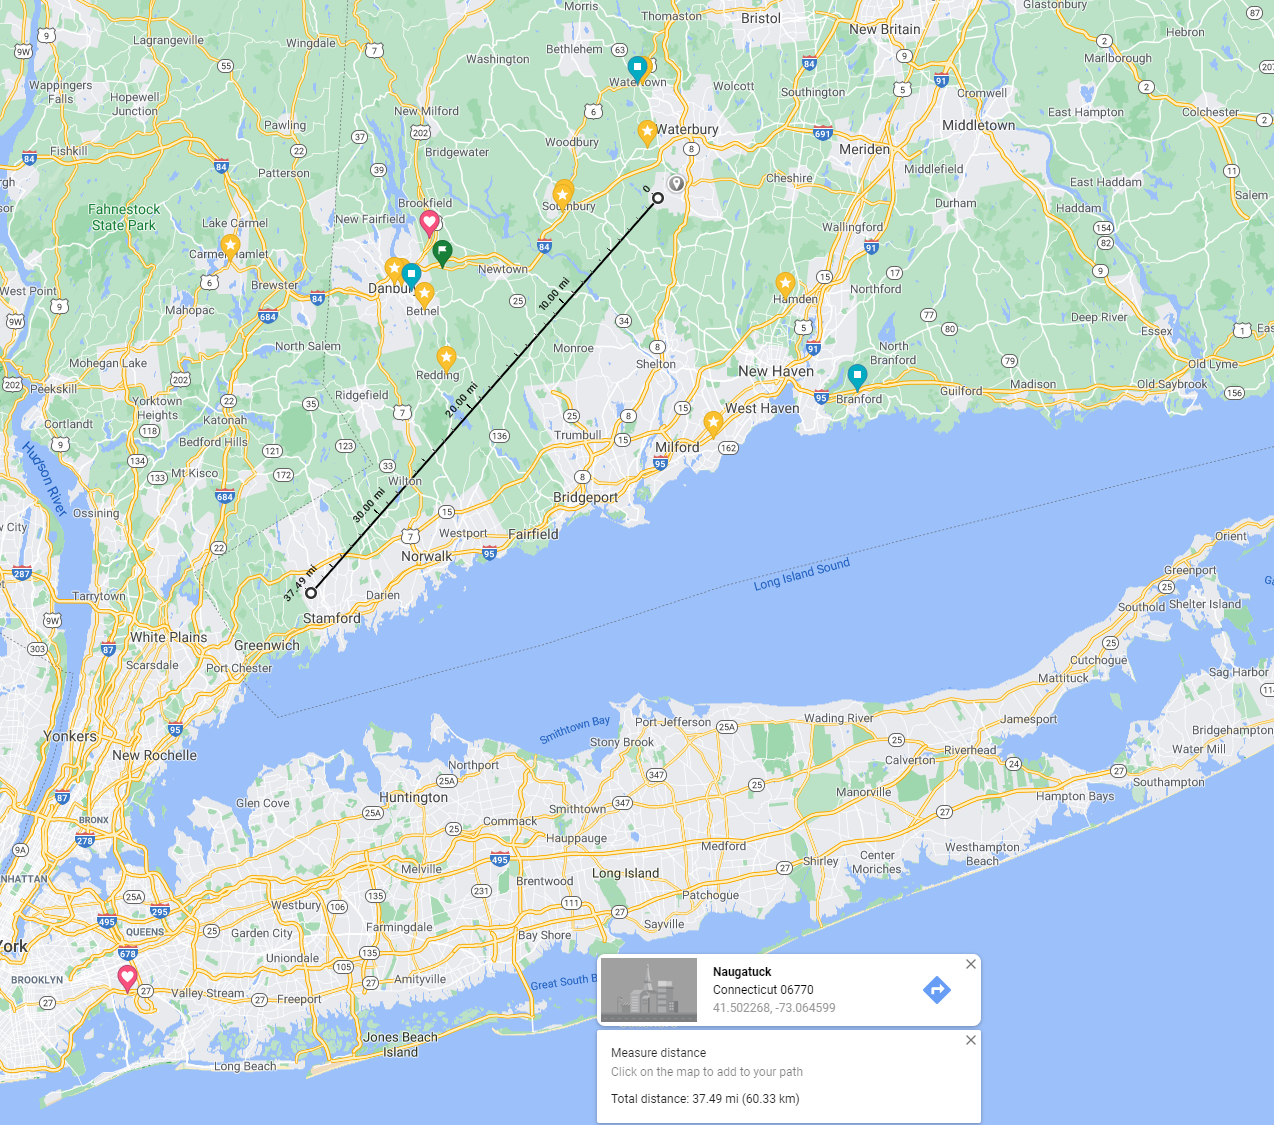 Google Map: Distance between Naugatuck CT and Stamford CT Approx: 38 miles